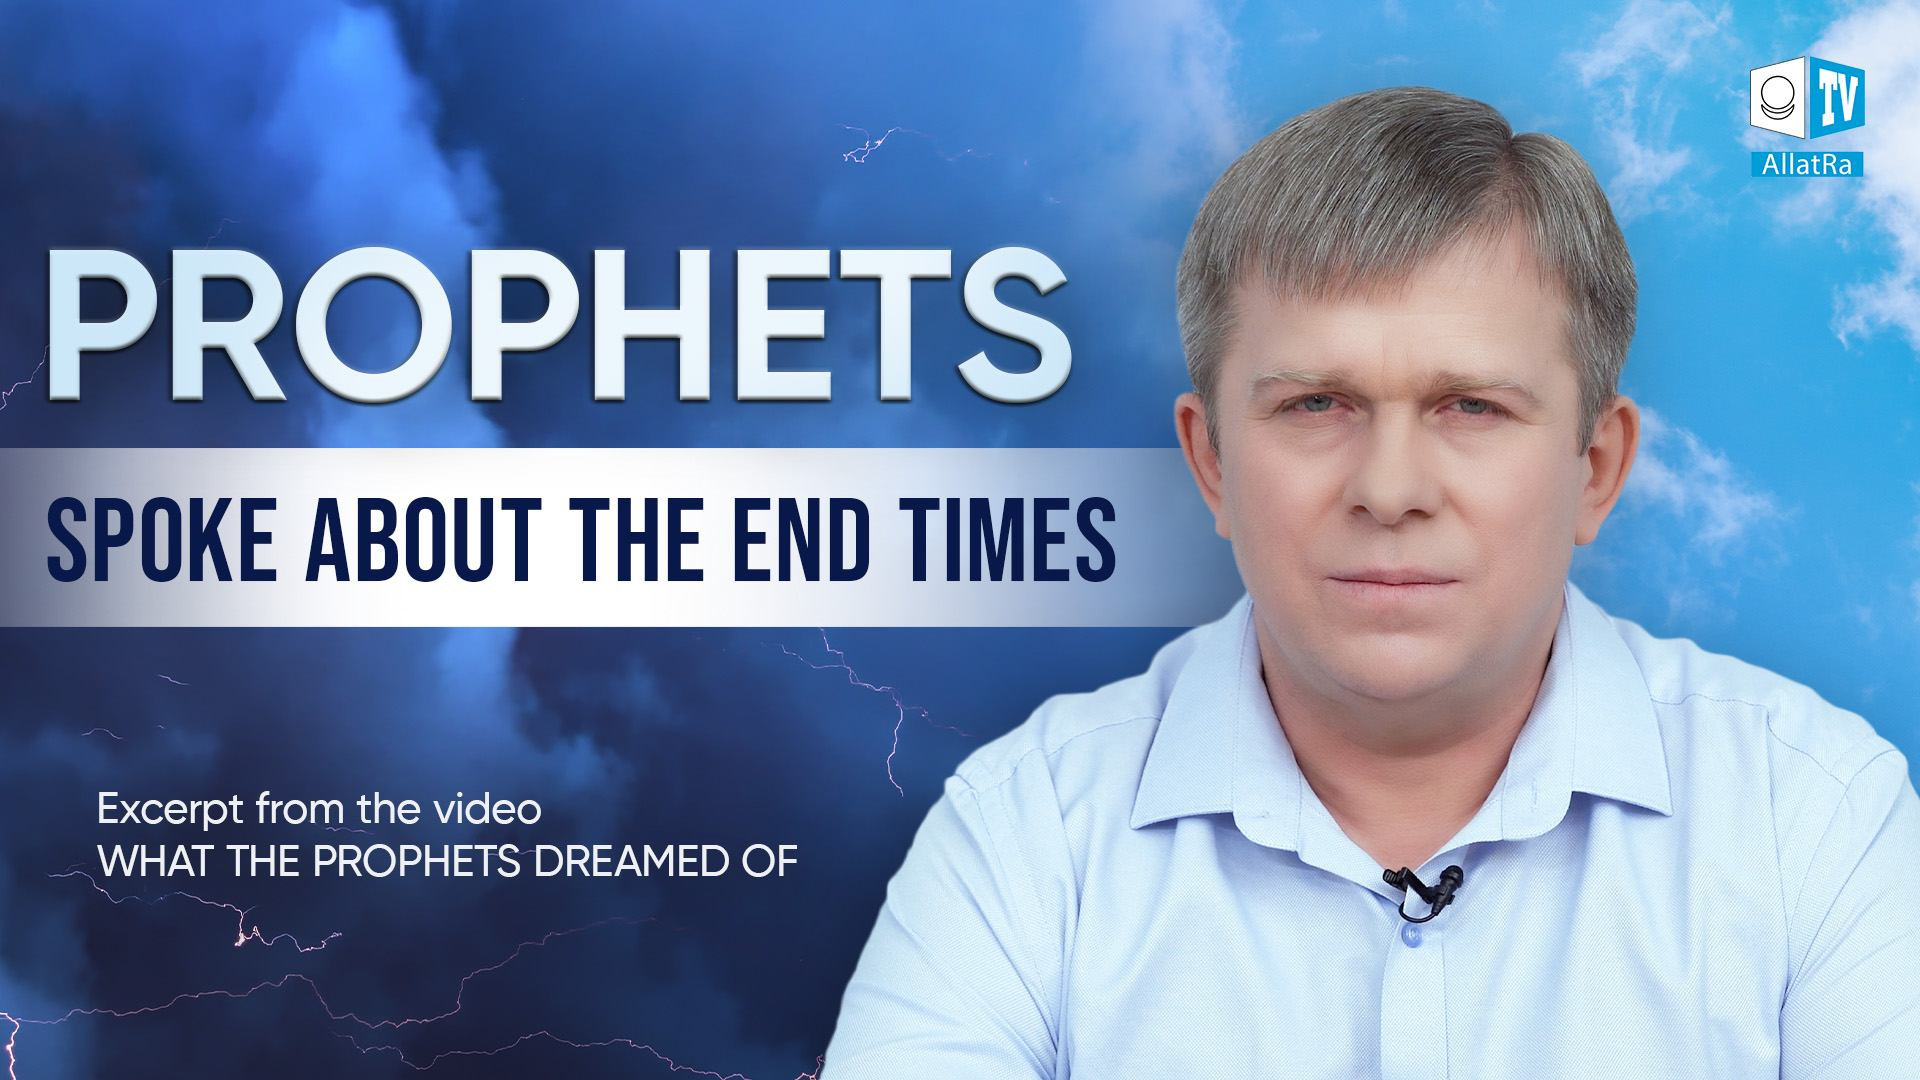 At What Times Did the Prophets Come, and What for?